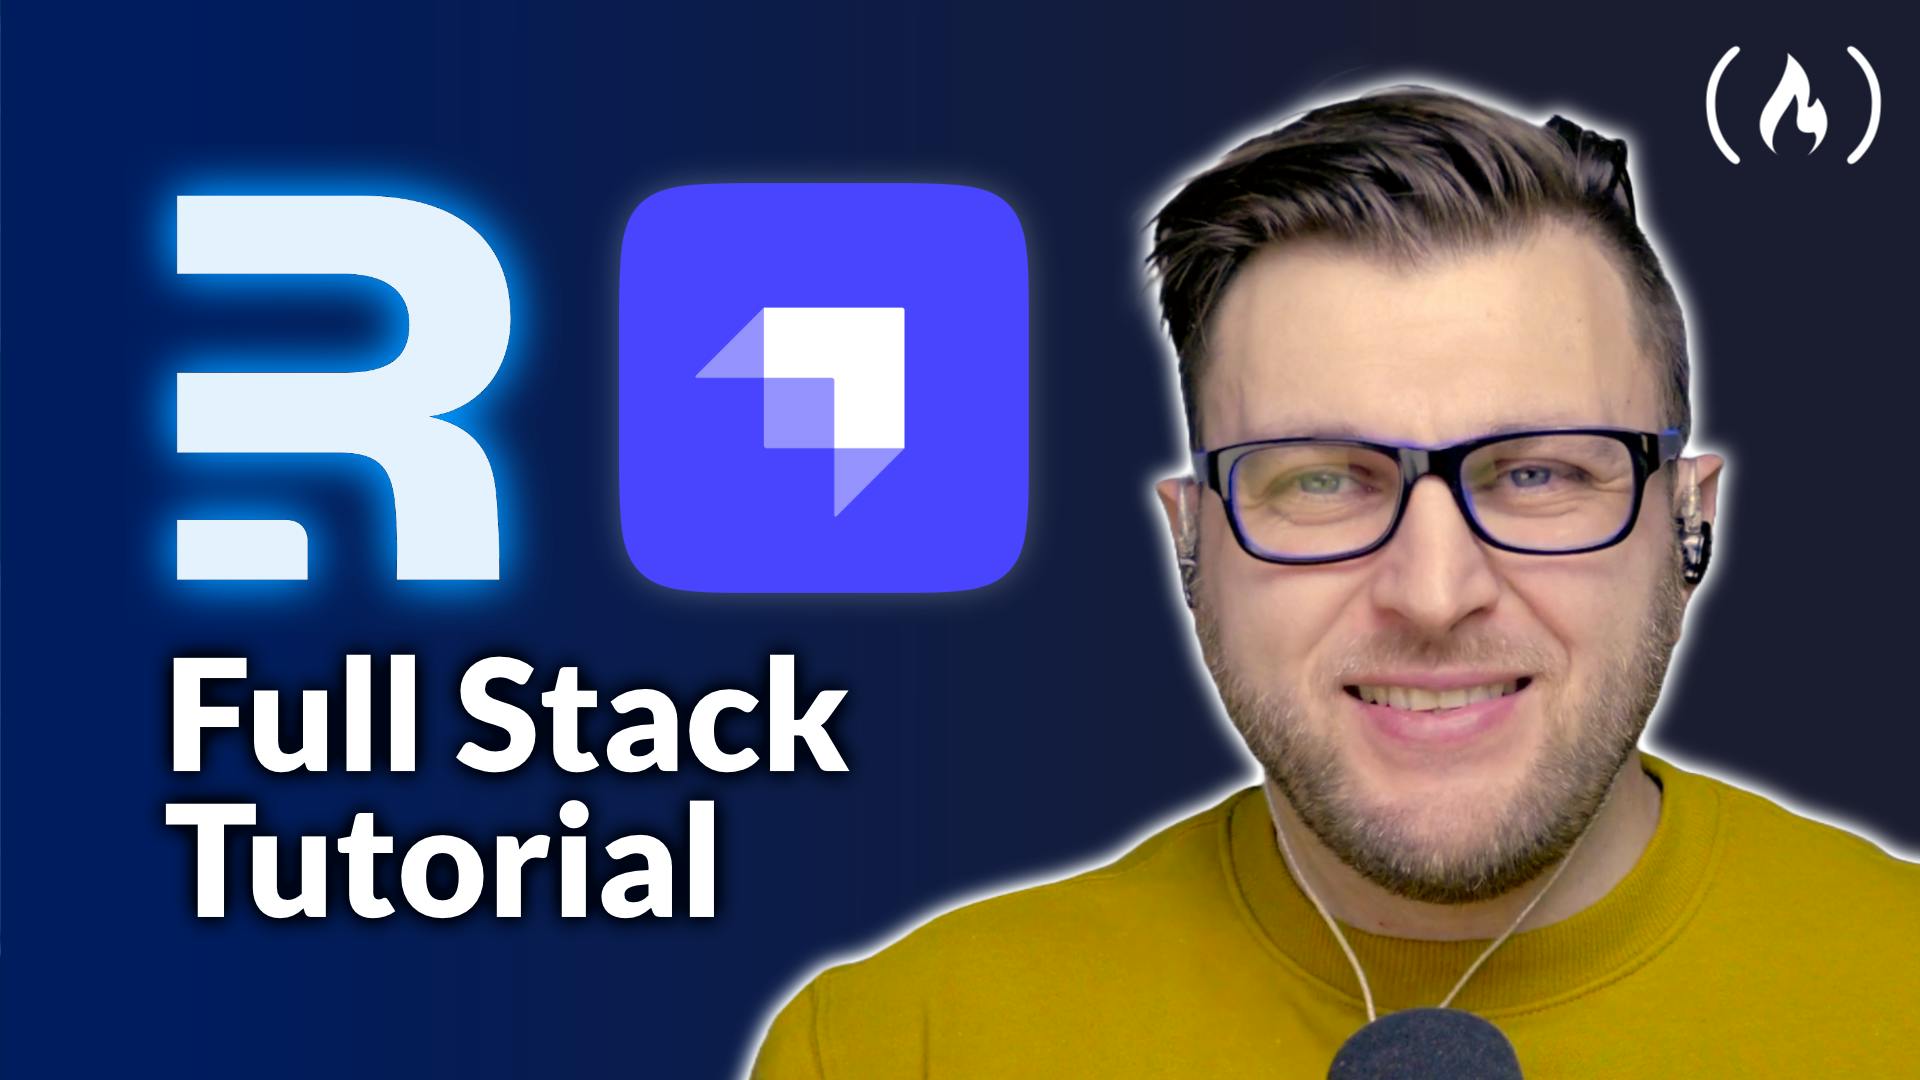 Remix and Strapi logos next to Paul and the title "Full Stack Tutorial"